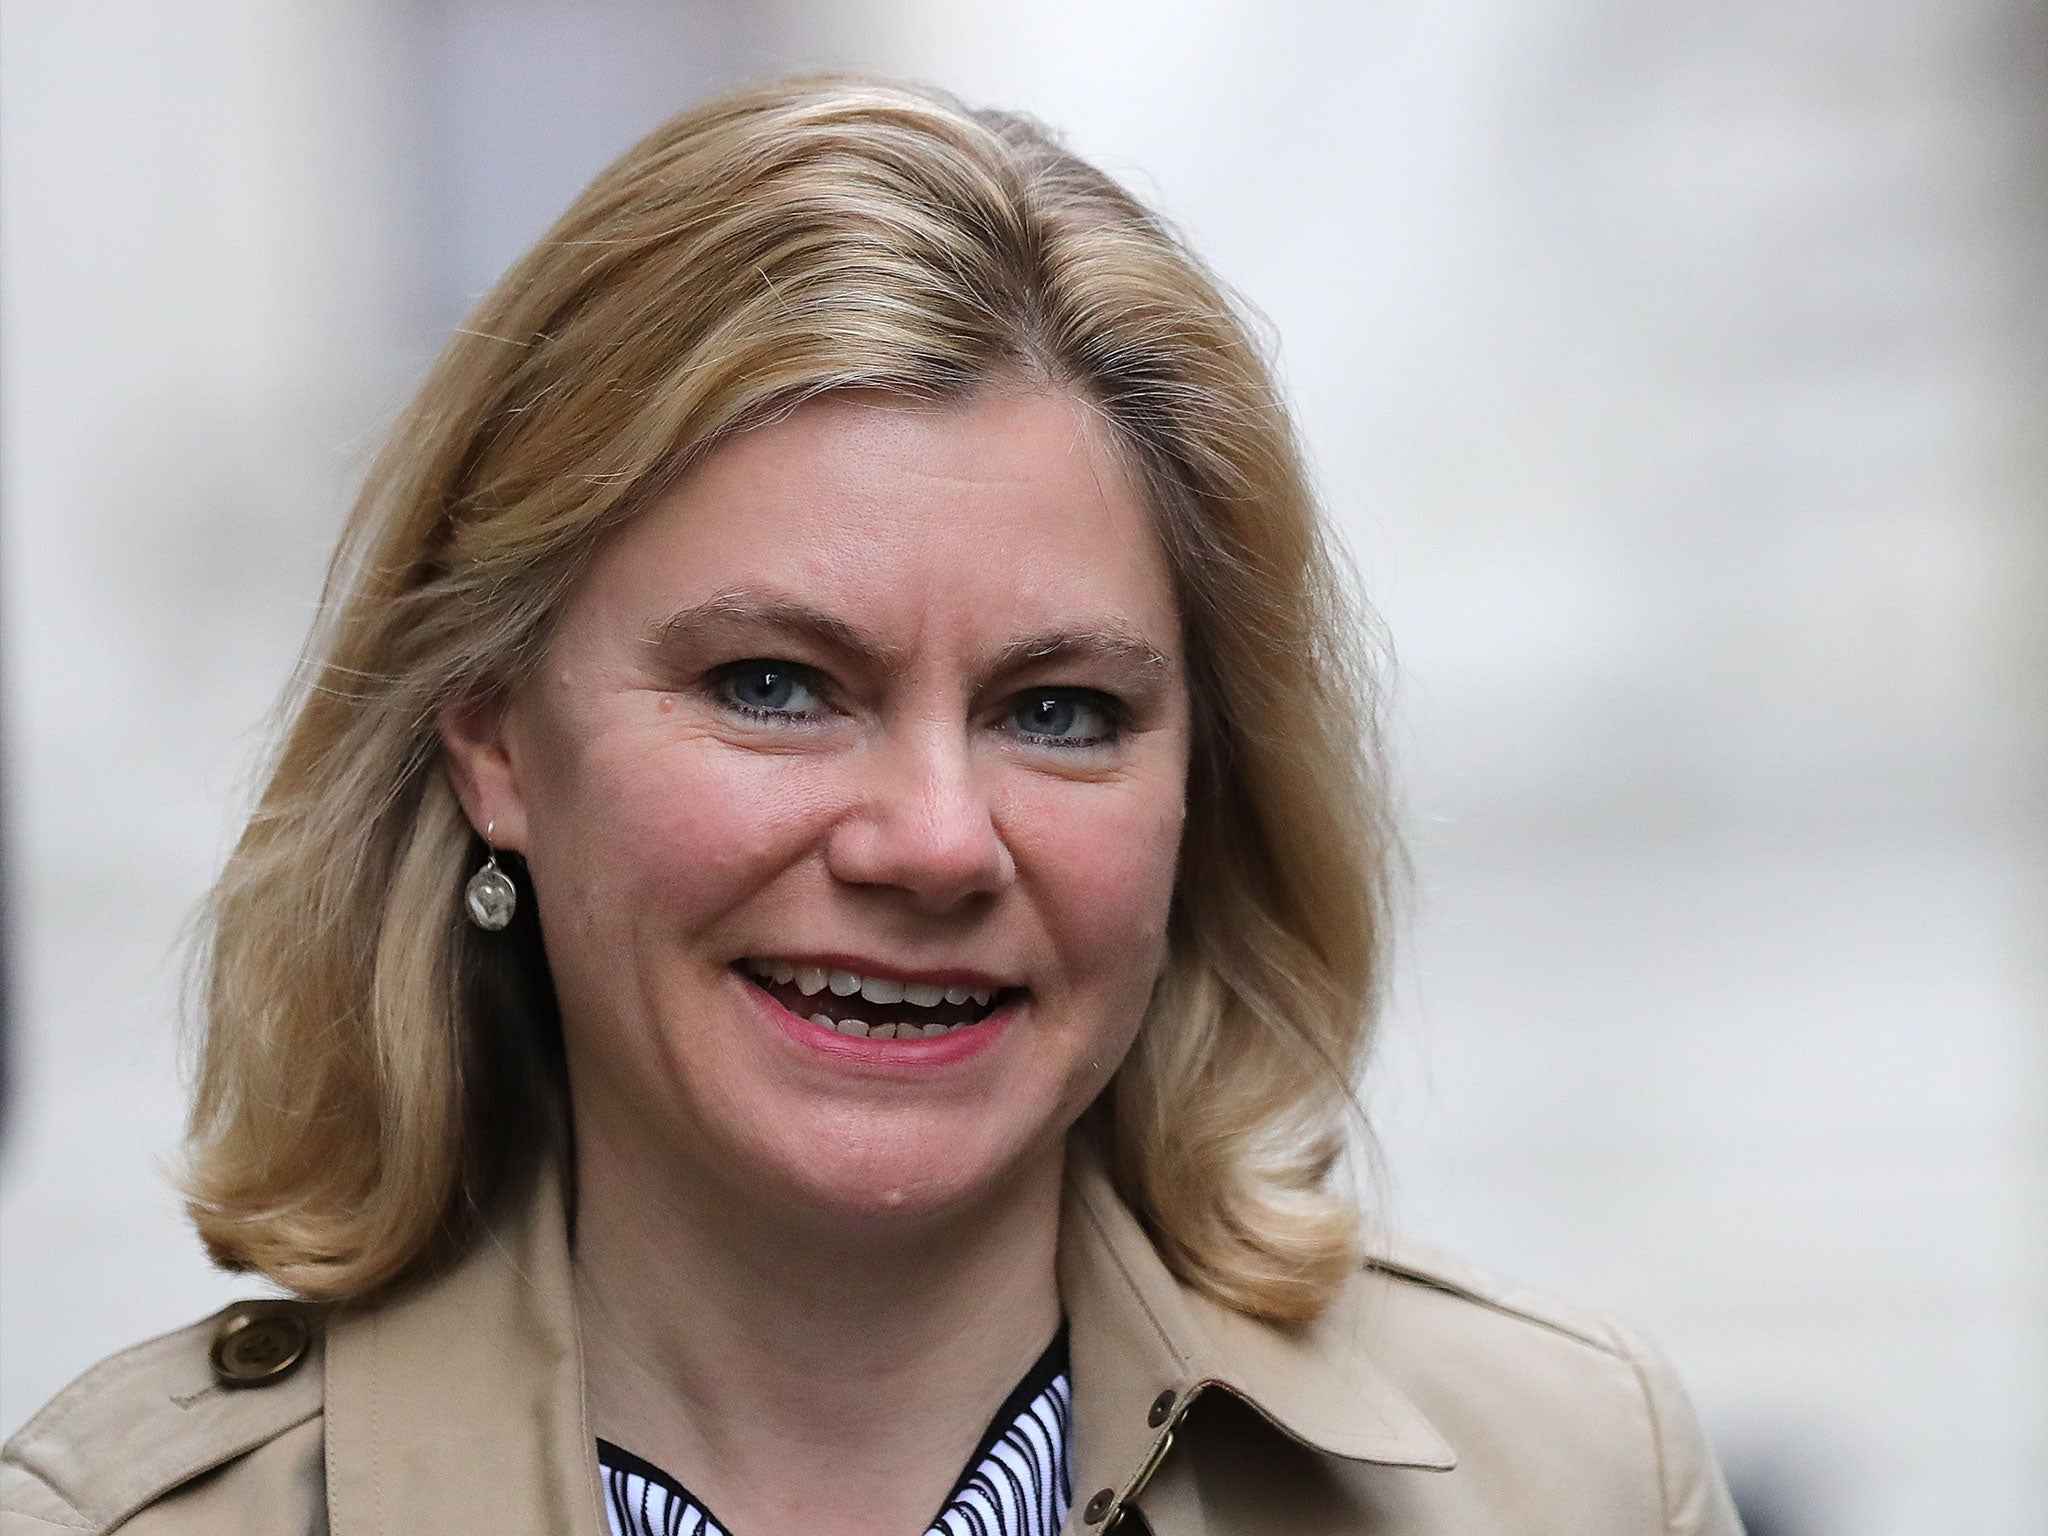 Justine Greening has told Tory colleagues to give a 'broader push' to social mobility